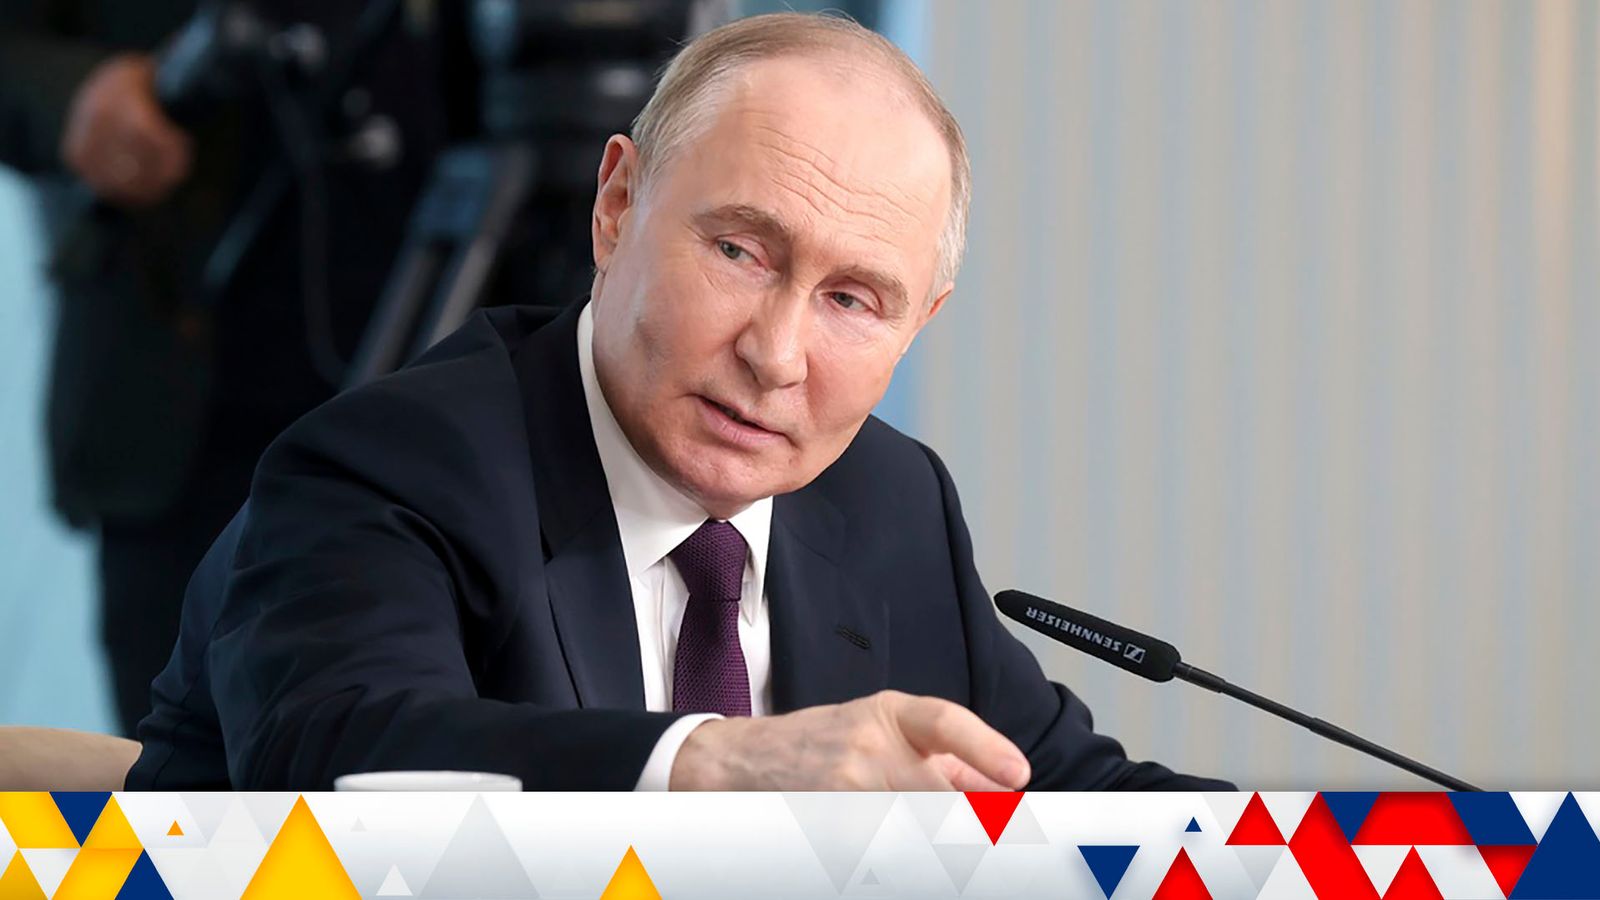 Russia Could Deploy Missiles In Striking Distance Of West: Putin